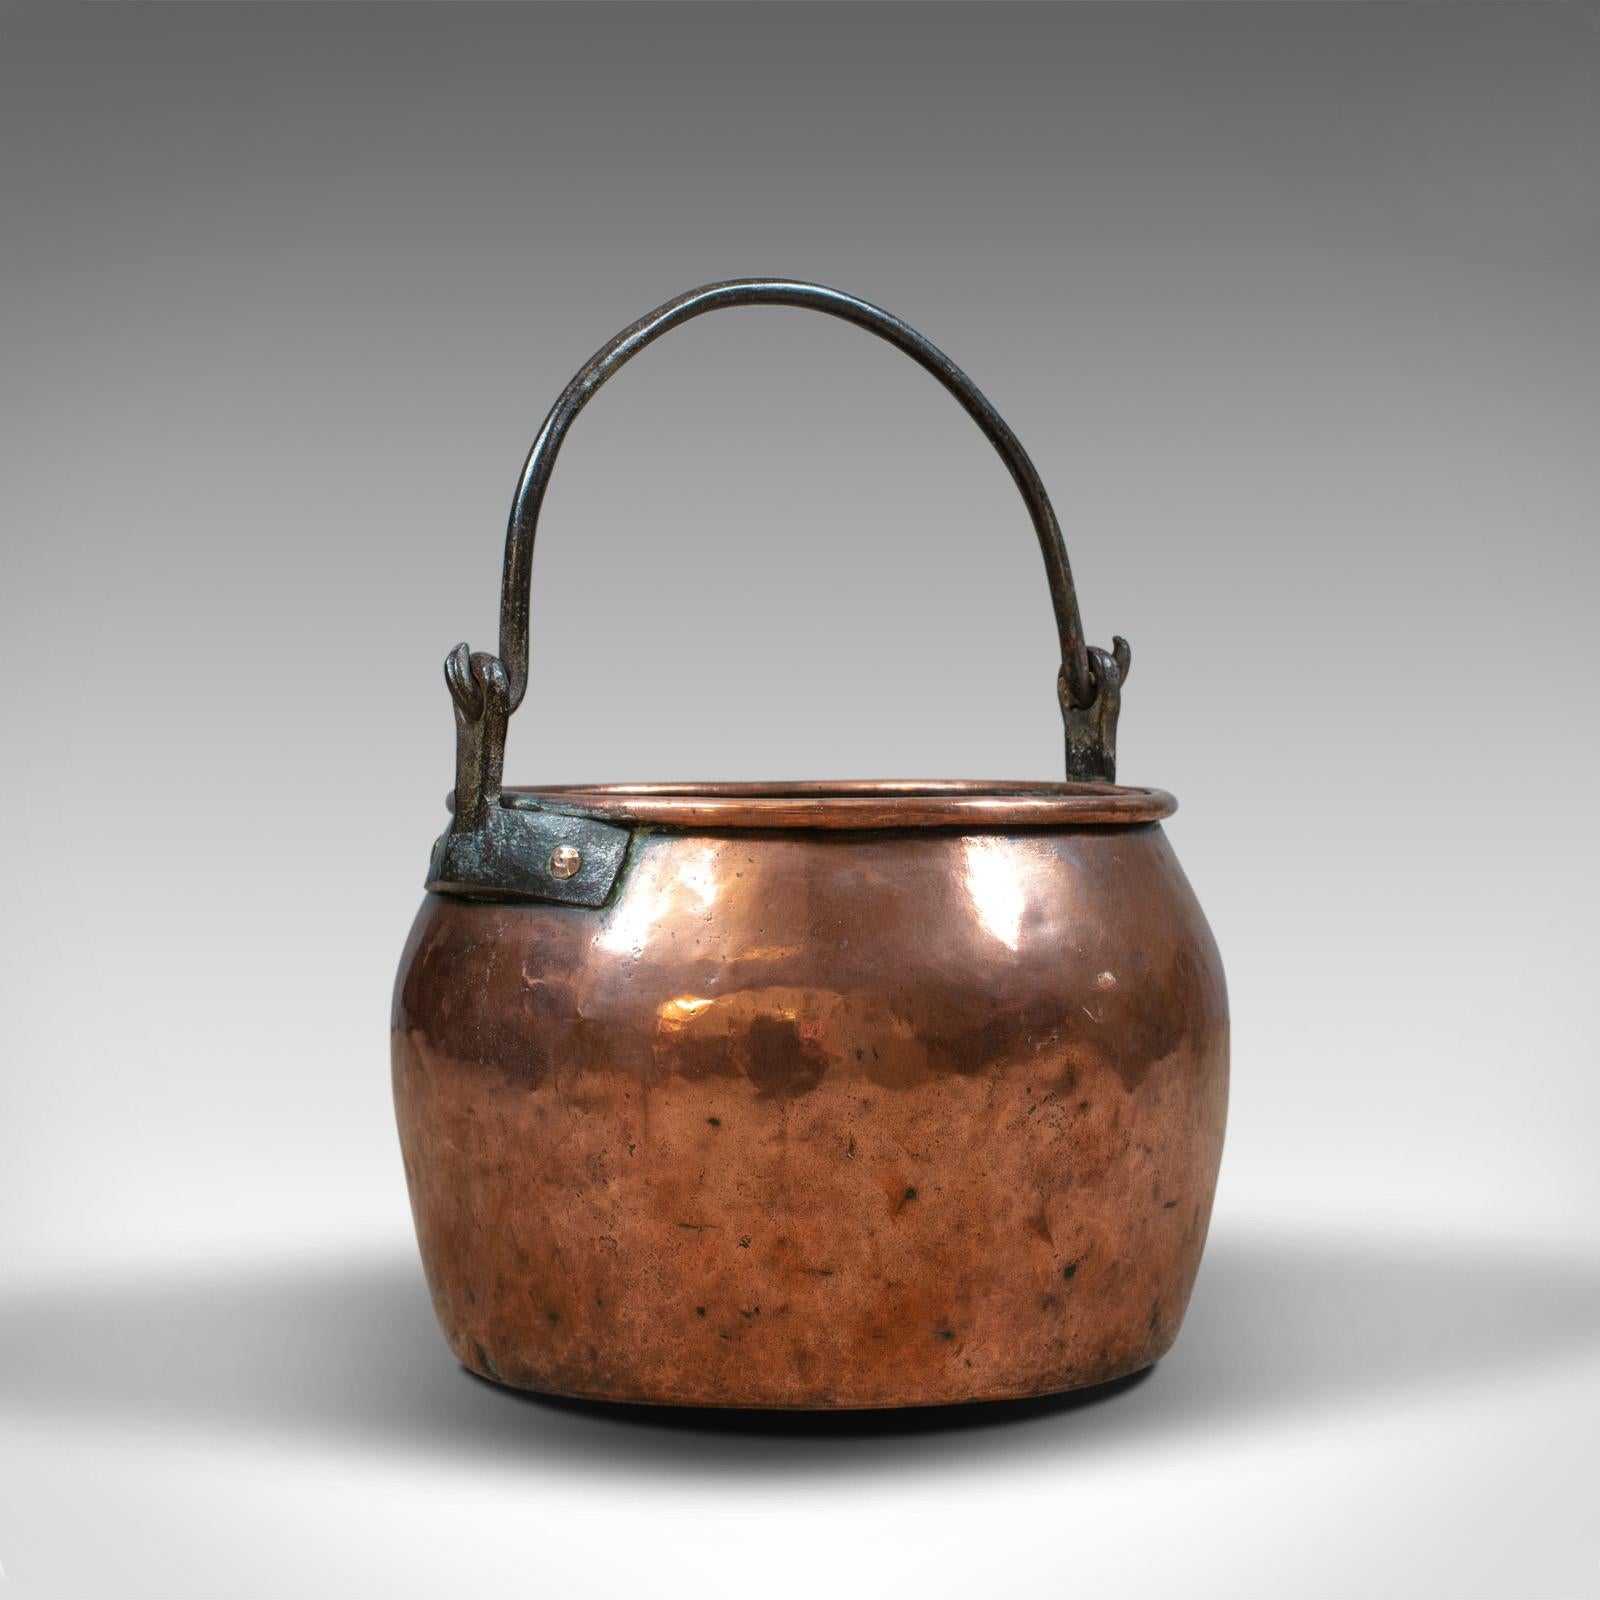 This is an antique copper cauldron. A heavy, English, Georgian pot with iron handle, ideal as a fireside log or coal scuttle, dating to the 18th century.

A mid-sized copper cauldron in fine order throughout
Of good proportion and attractive